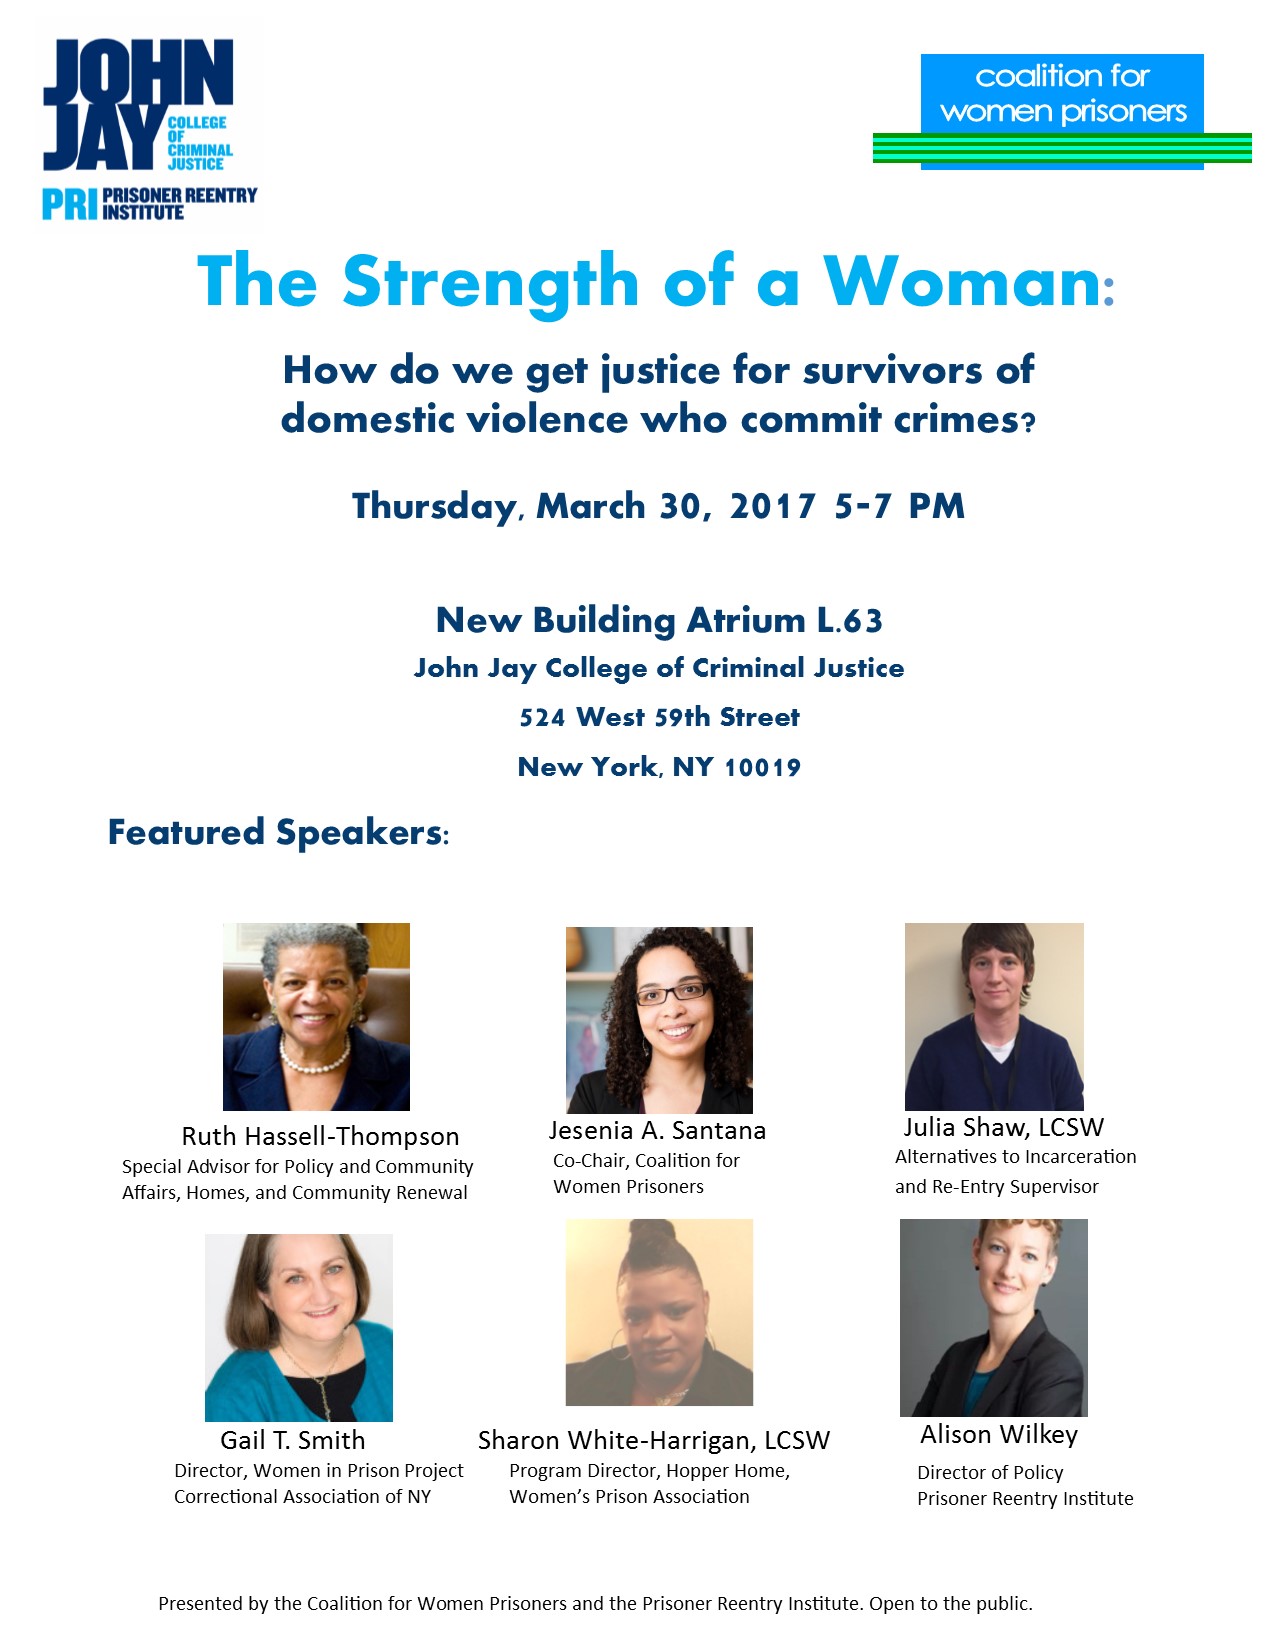 The Strength of a Woman Film Screening and Panel Discussion